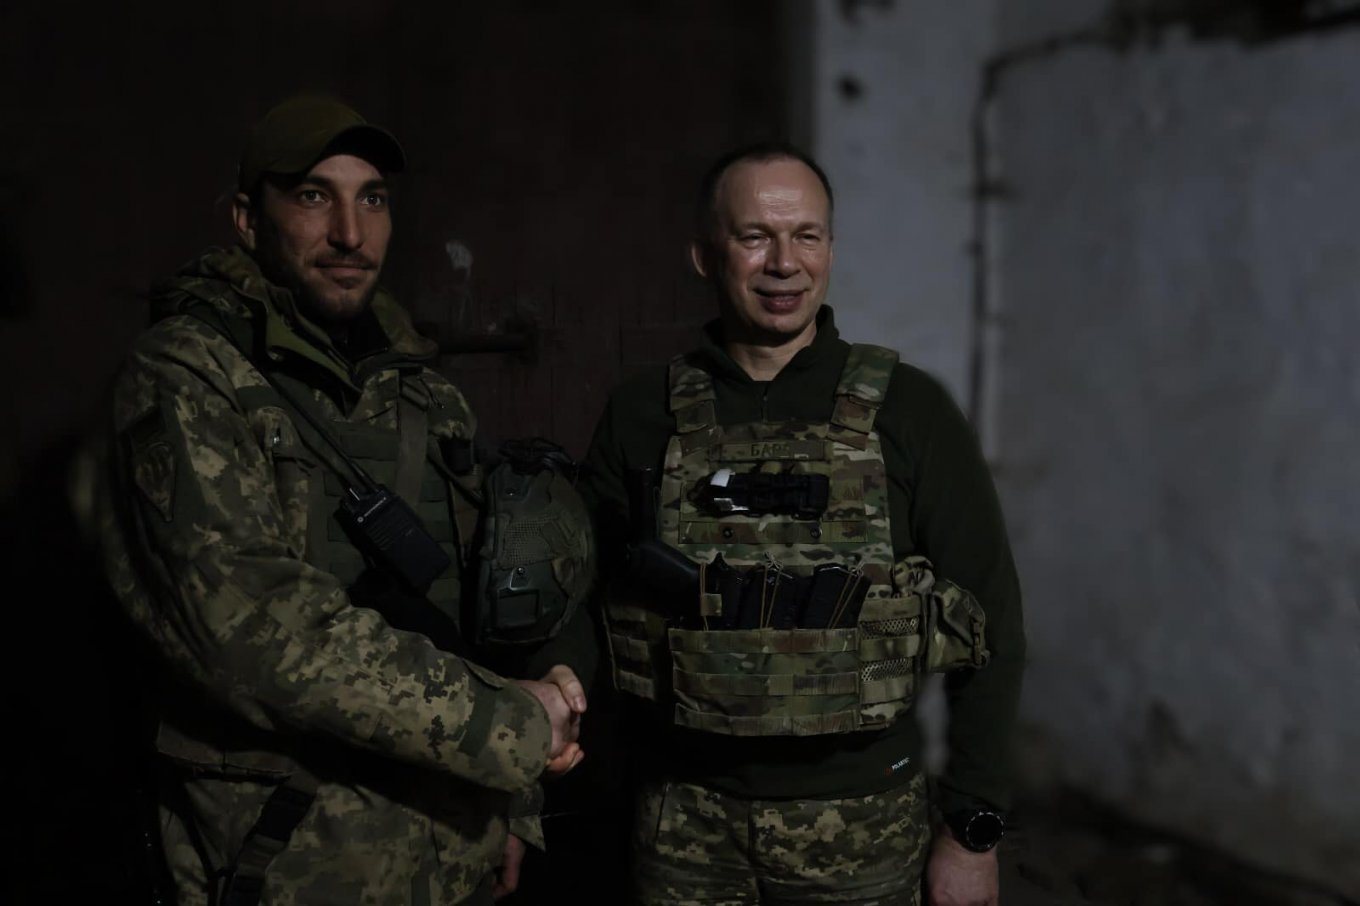 Ukrainian Ground Forces' Commander Colonel-General Oleksandr Syrskyi says the real heroes now are the defenders who hold the eastern front on their shoulders, Defense Express